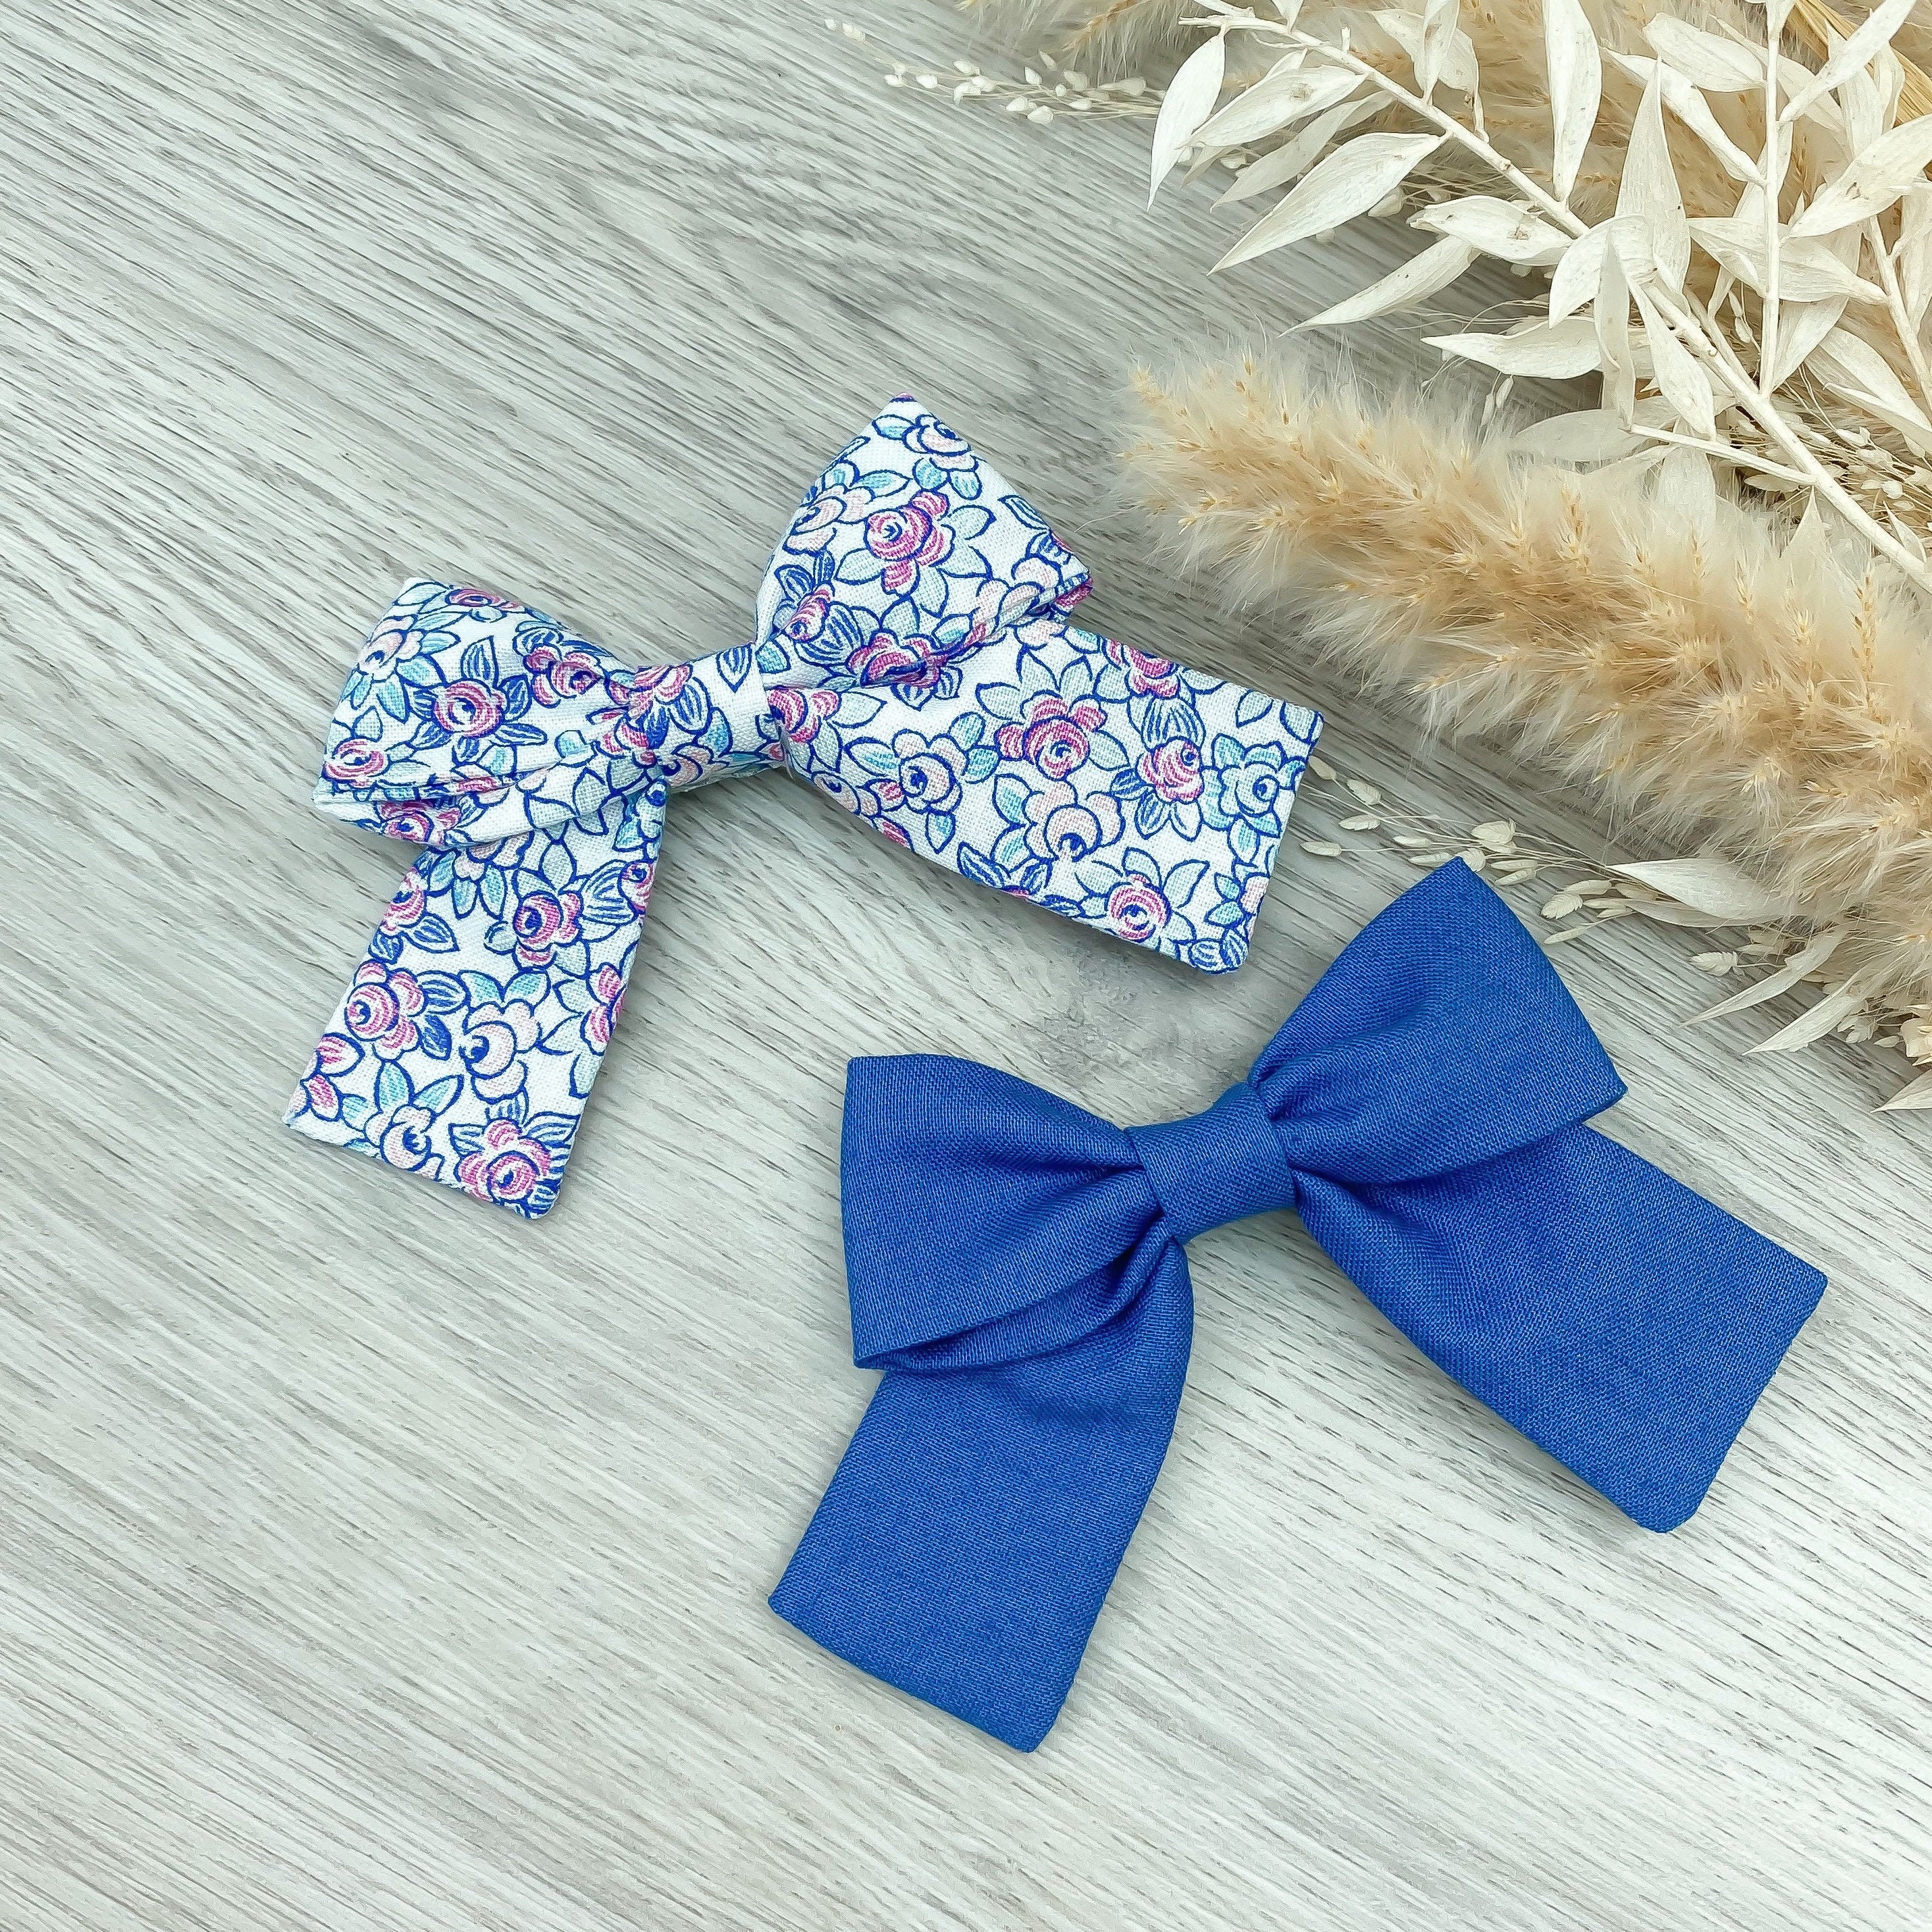 Girls Small 2 Pack Jess The Cat Sparkly Hair Bows Handmade Postman Pat